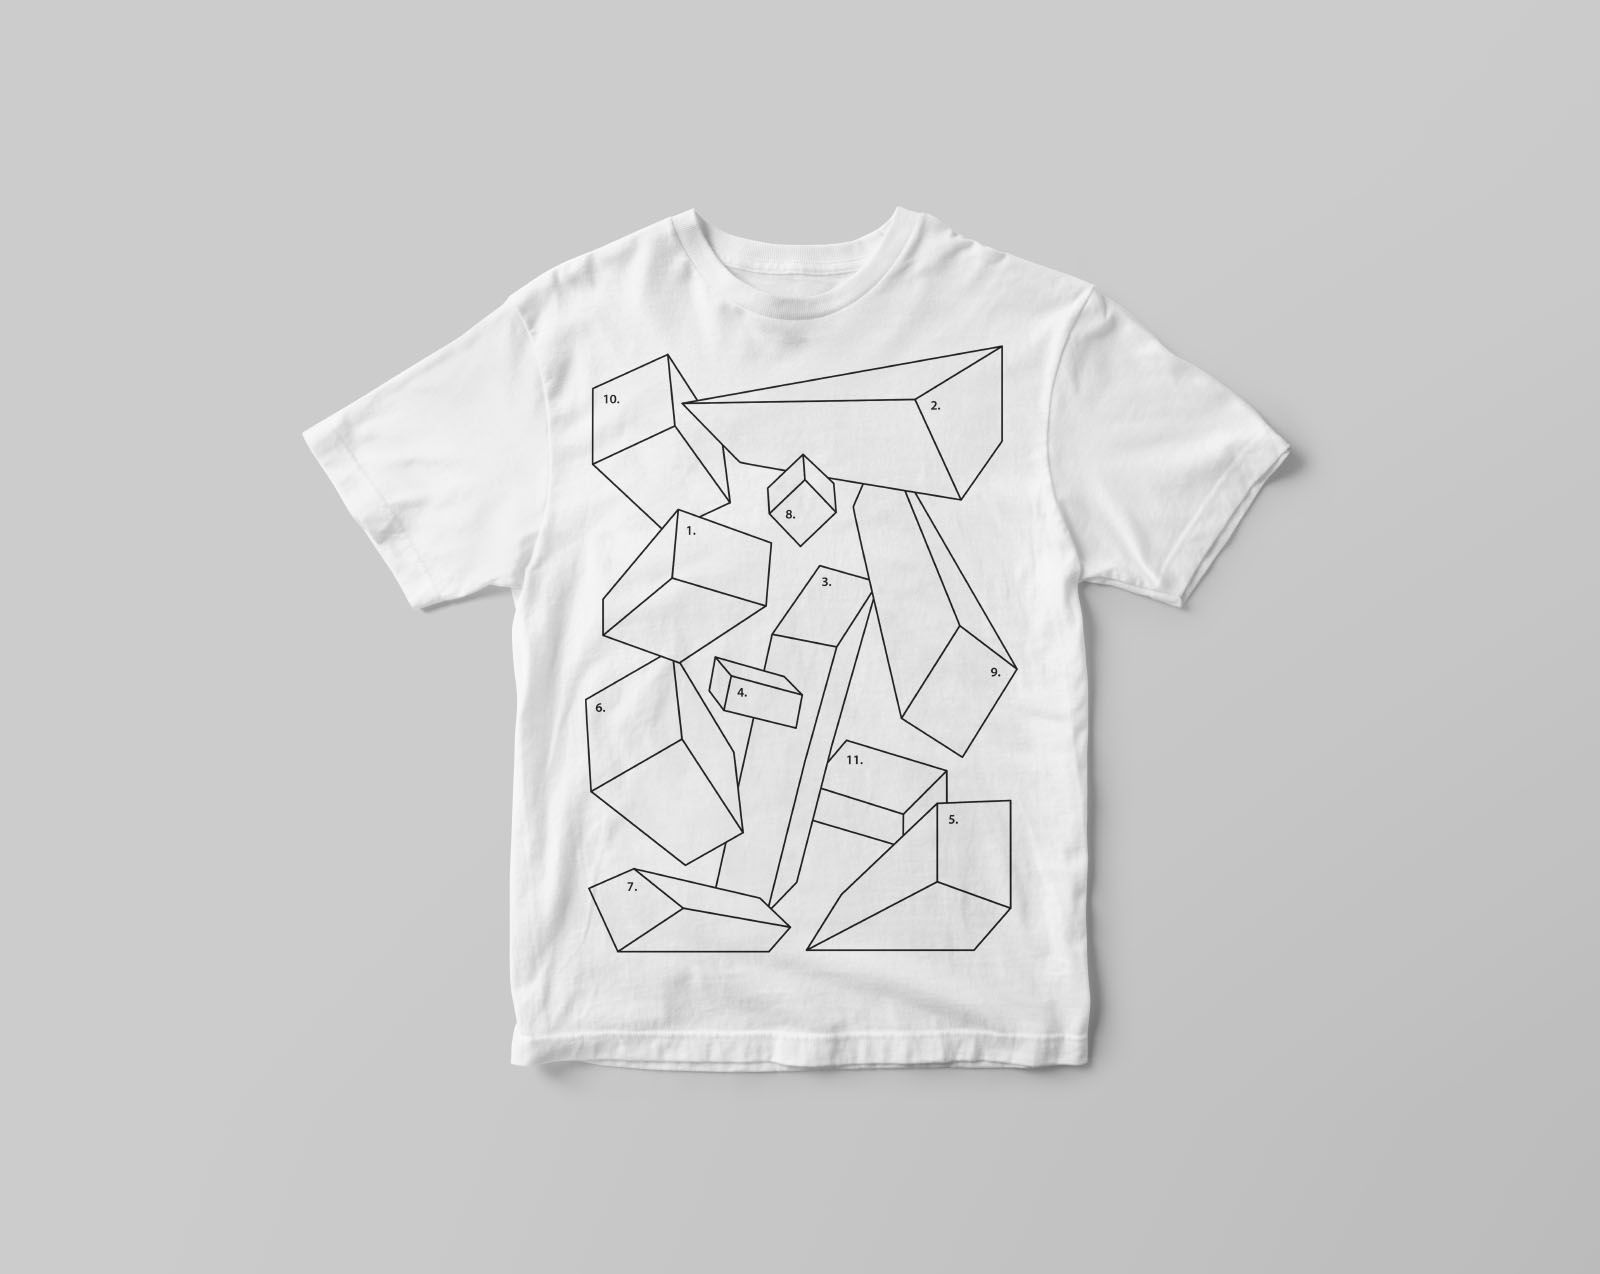 Simple Small Size T-Shirt Mockup